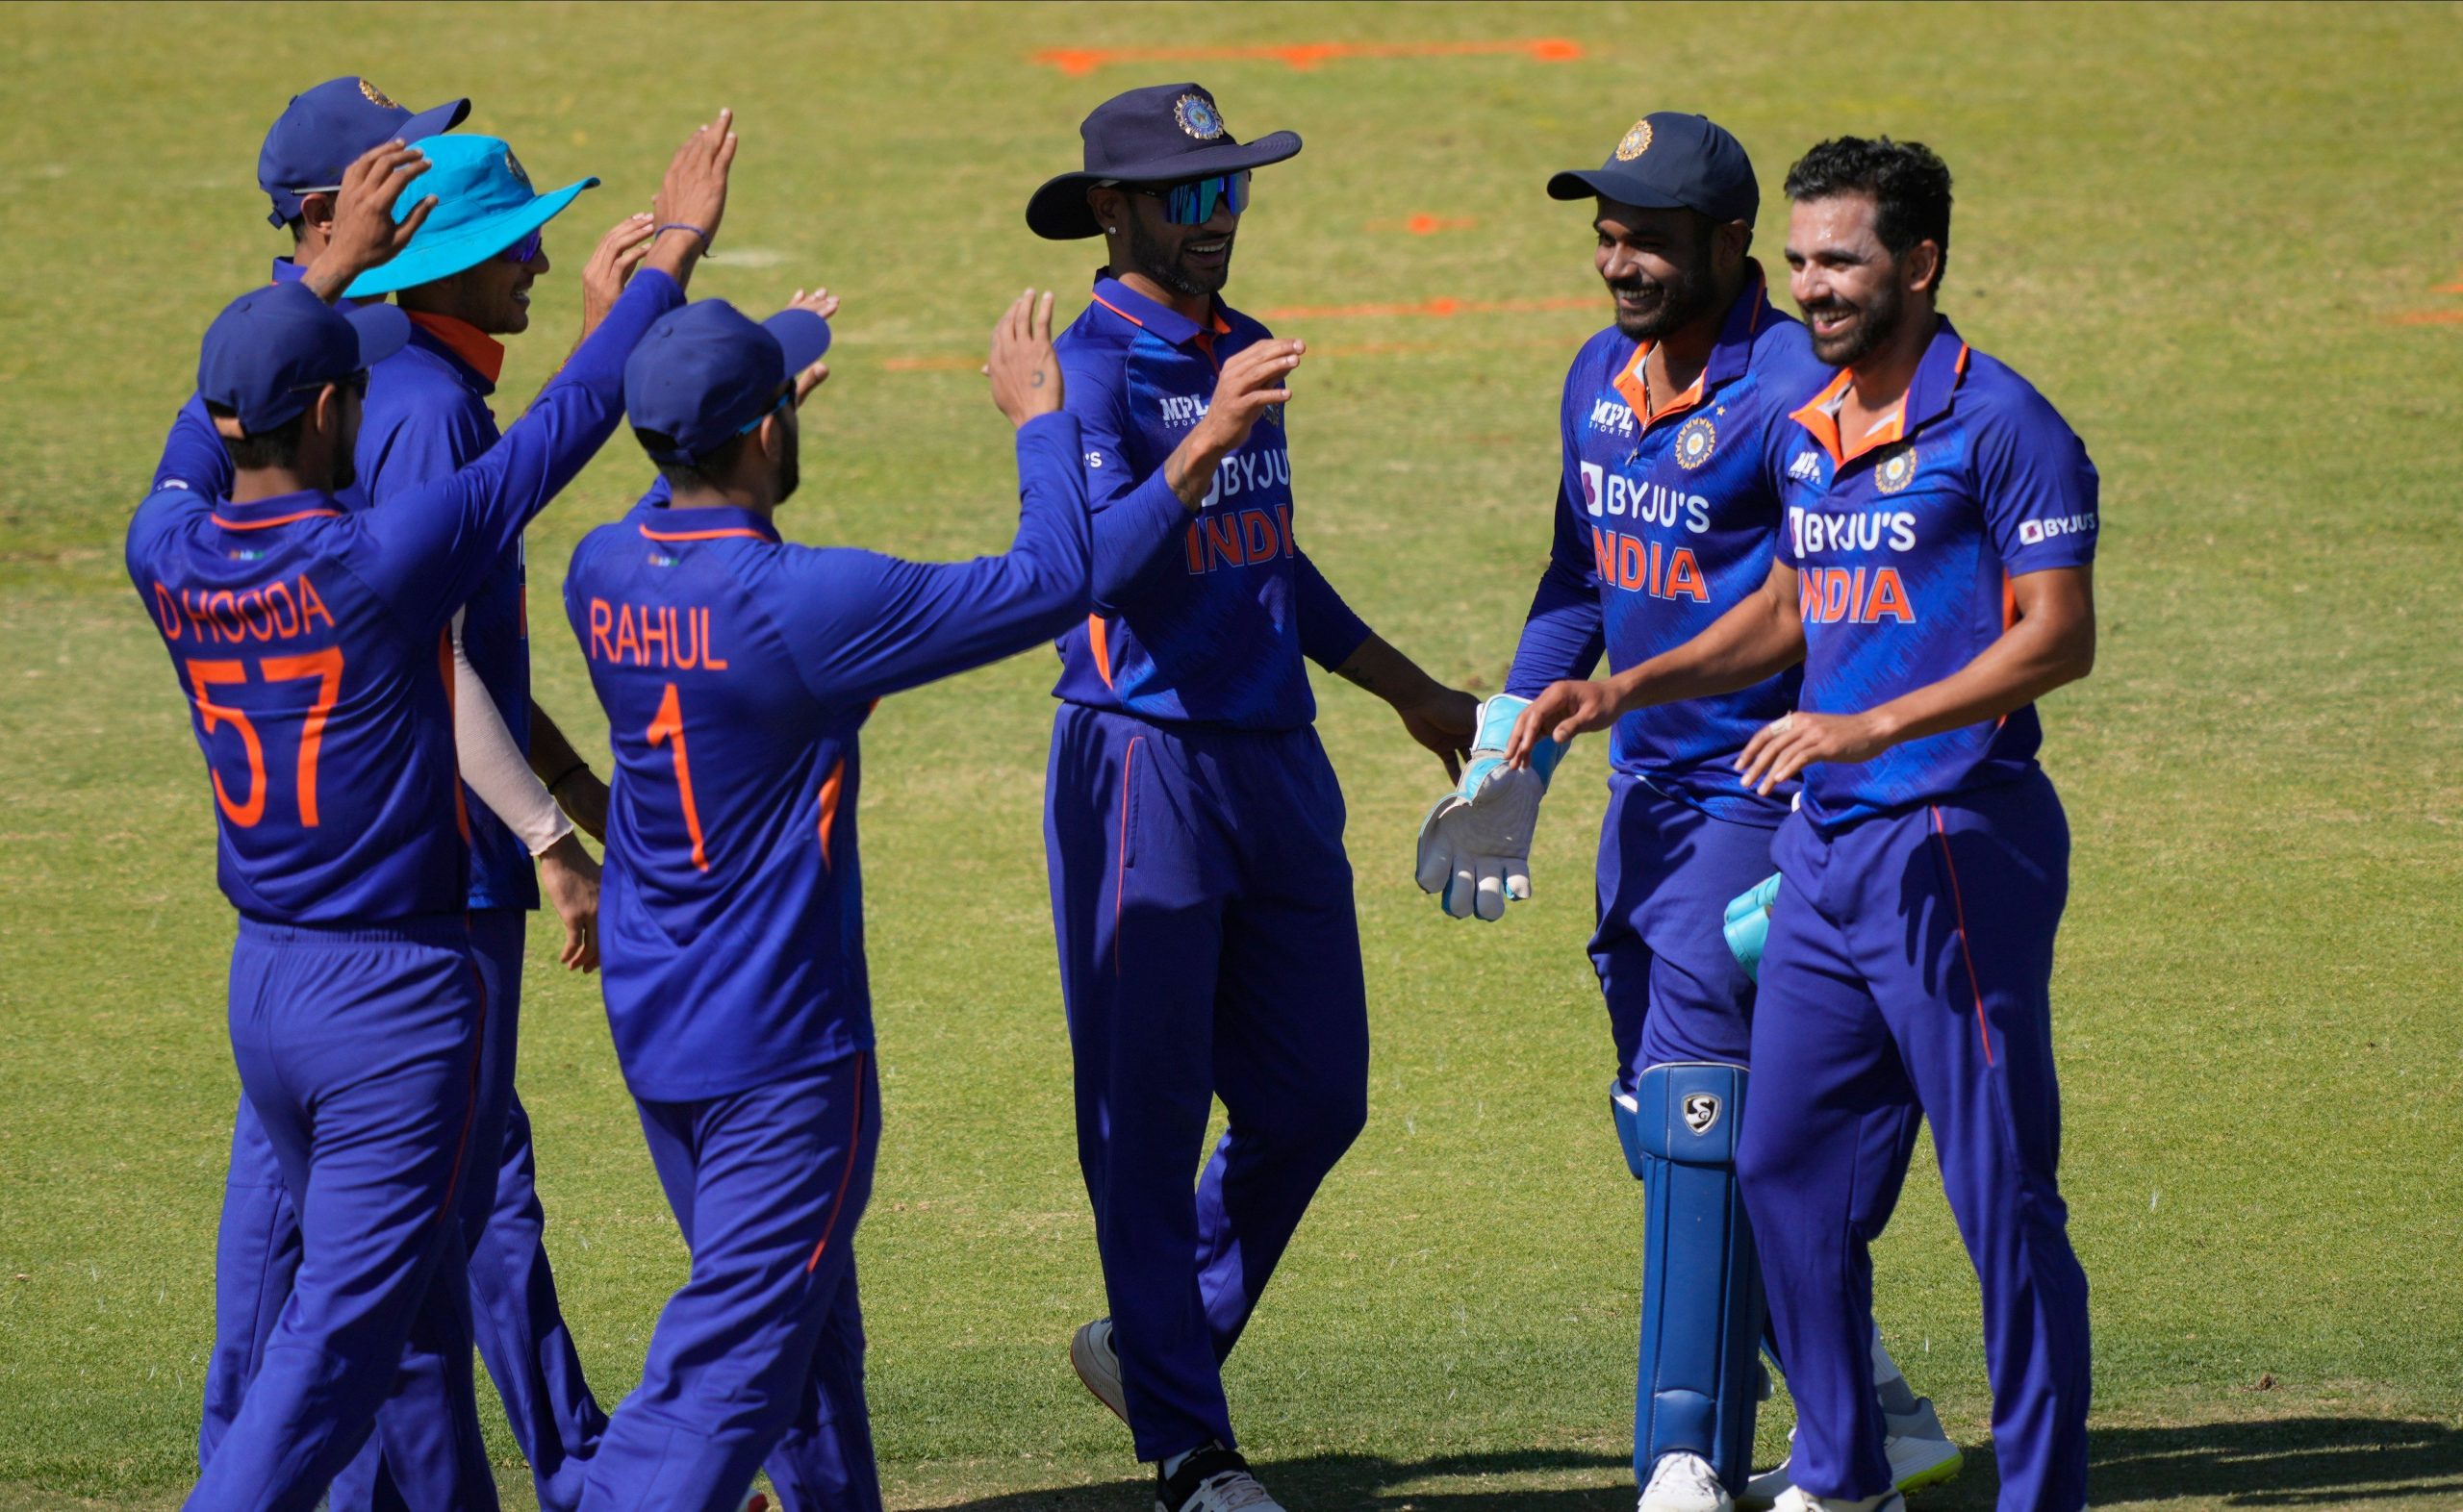 Asia Cup 2022: Can Indias bowling line-up overwhelm Pakistan?